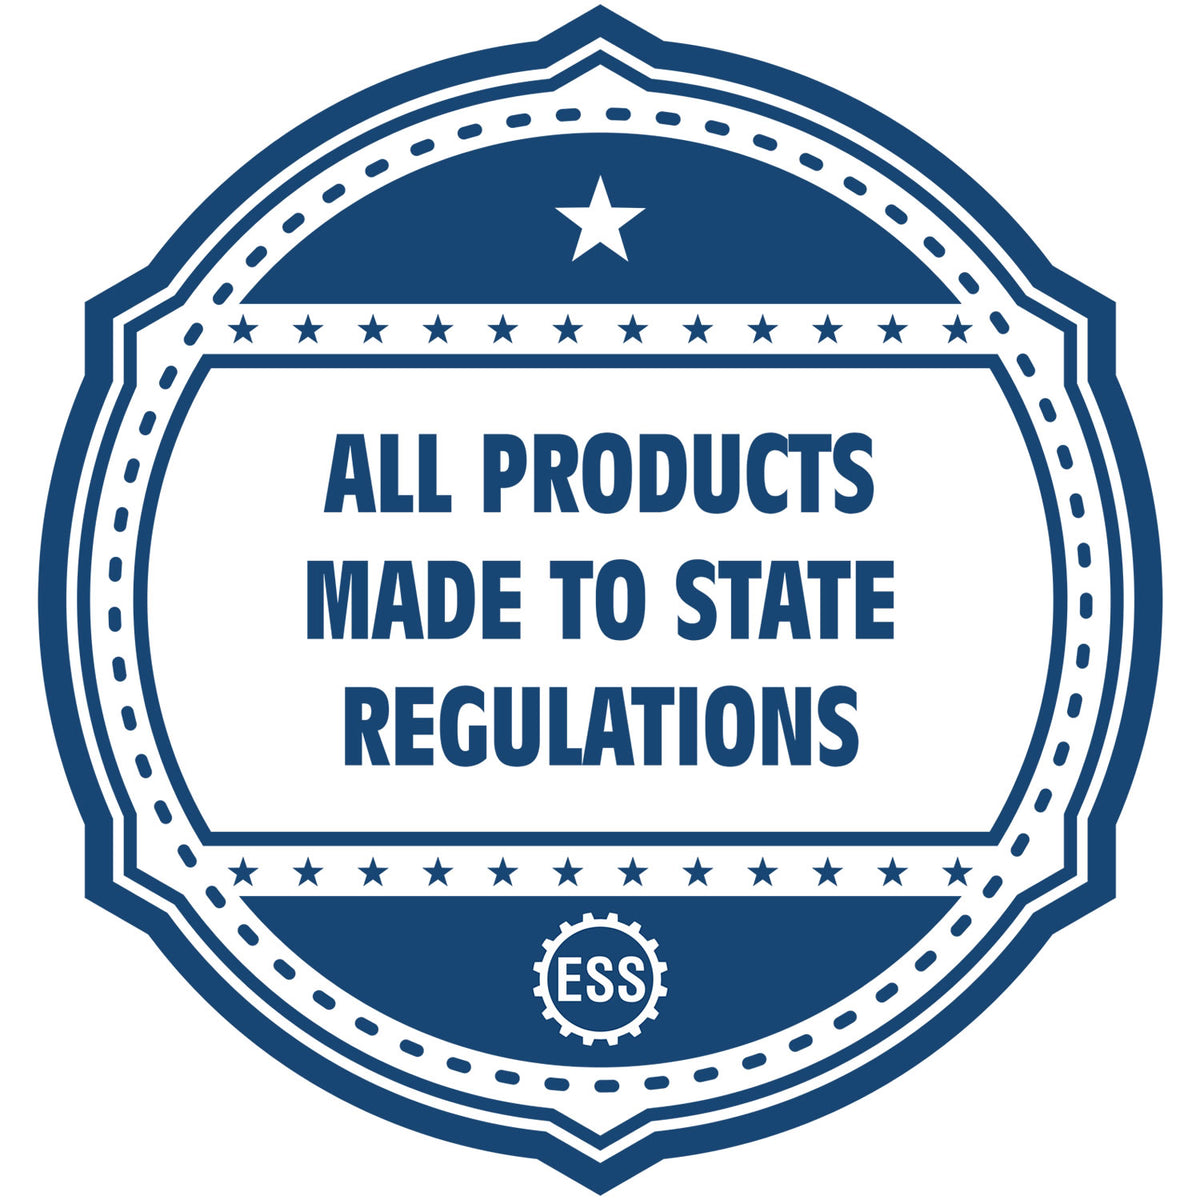 An icon or badge element for the Slim Pre-Inked North Carolina Land Surveyor Seal Stamp showing that this product is made in compliance with state regulations.